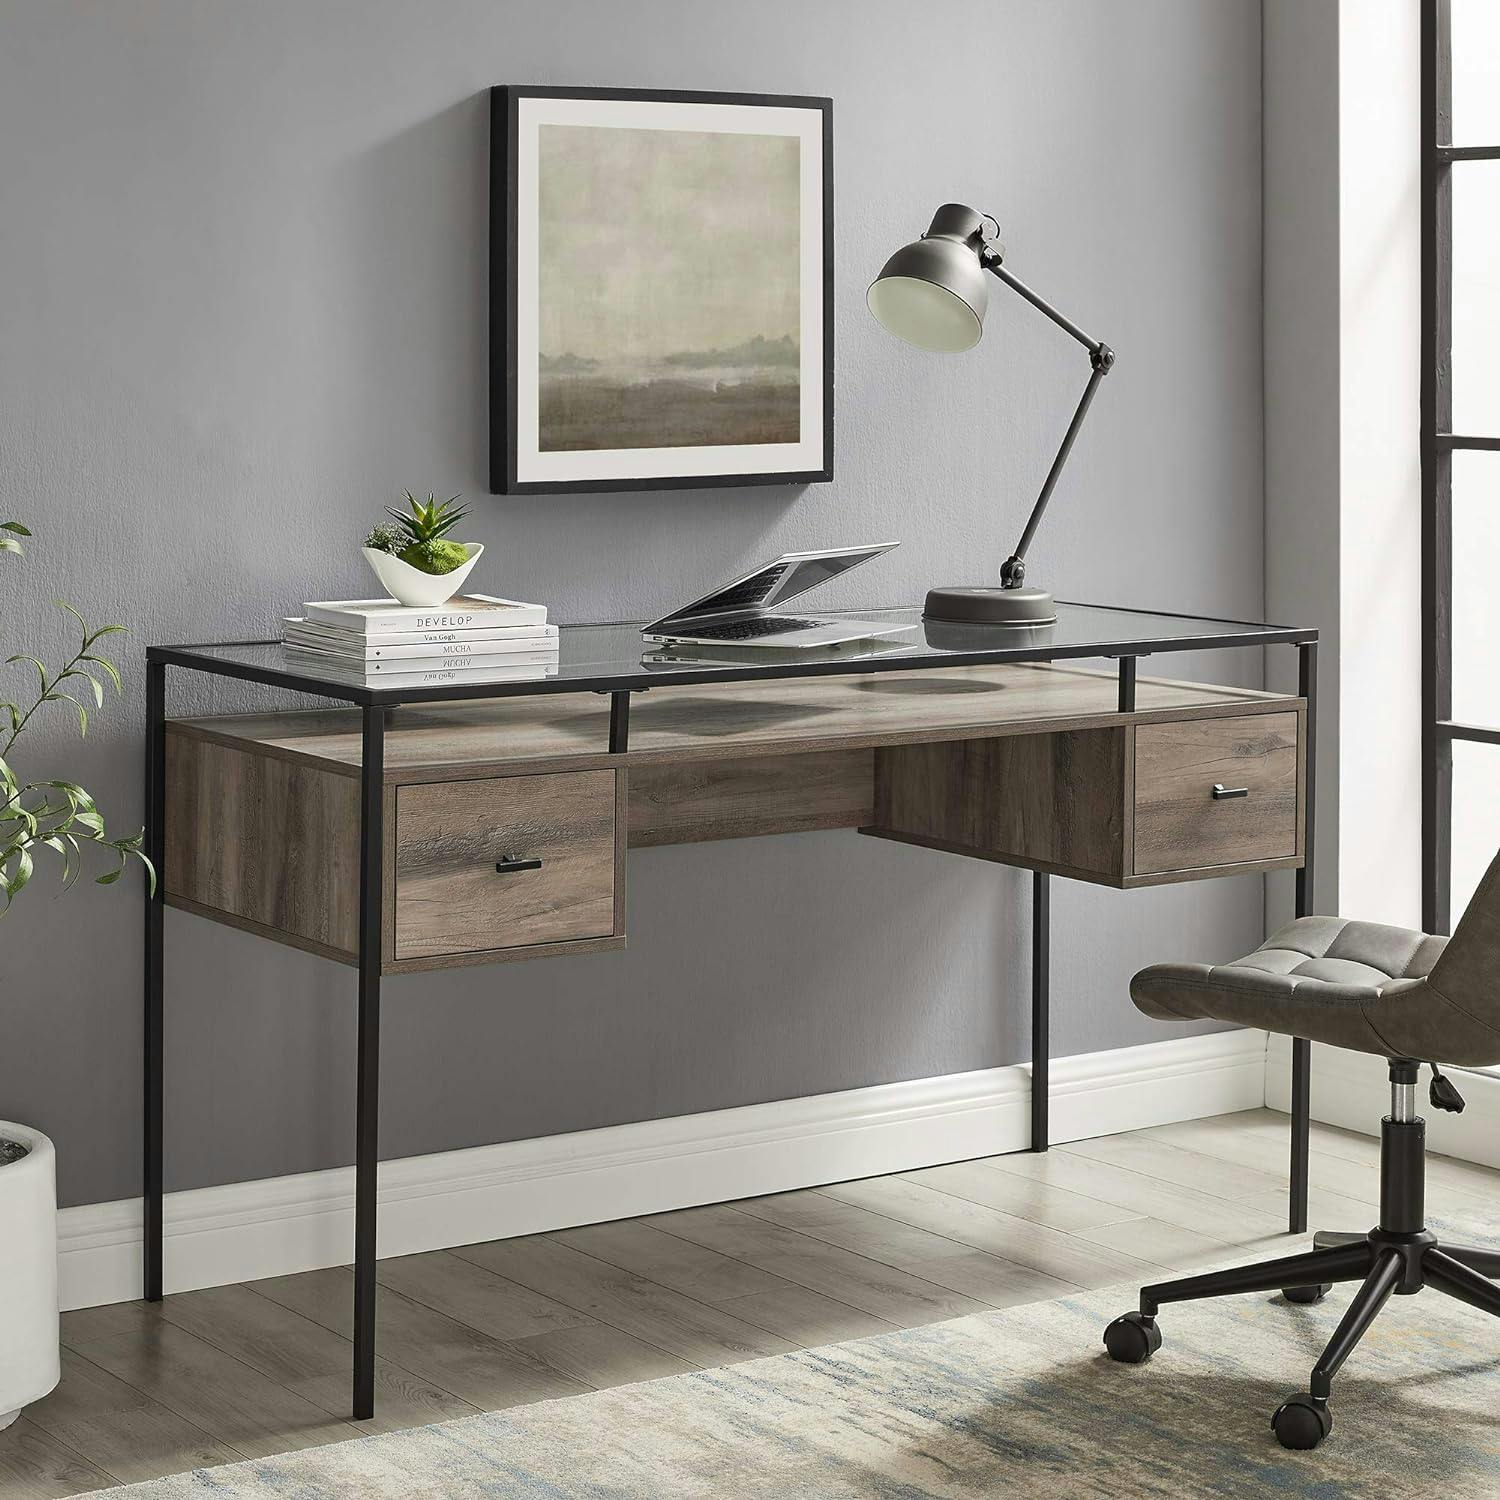 Grey Wash 56" Modern Glass Top Writing Desk with Drawers